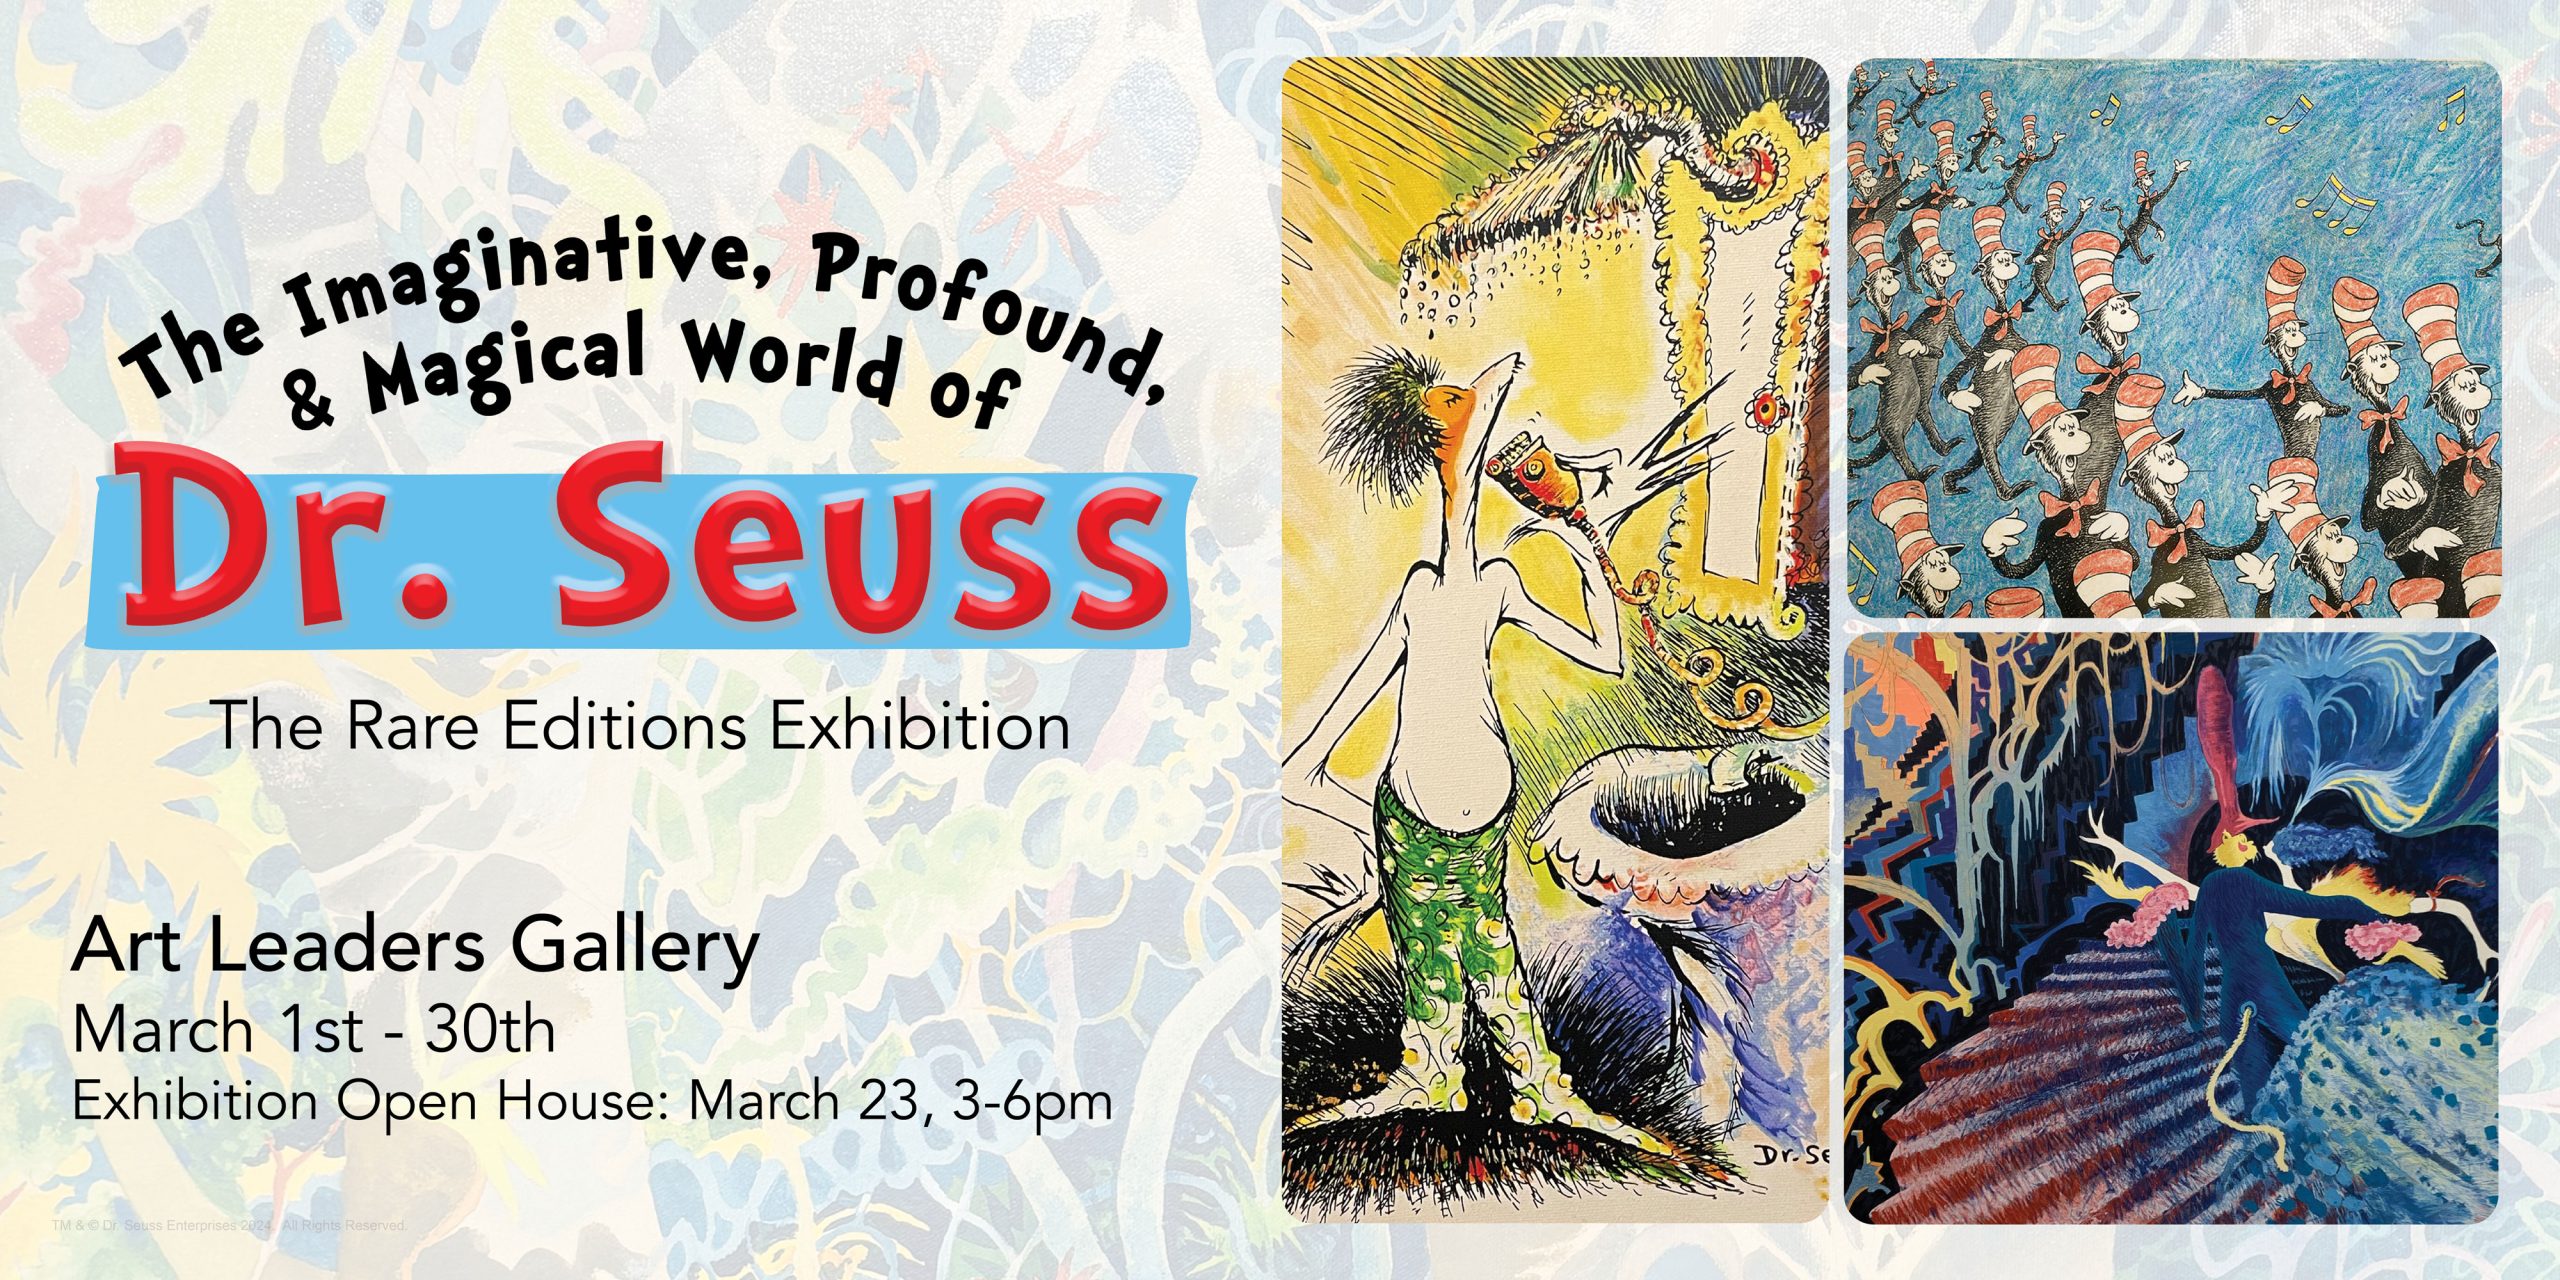 The imaginative, profound, and magical world of Dr. Seuss Rare Editions exhibition. Art Leaders Gallery, March 1st - 30th. Exhibition Open house March 23 3-6pm.